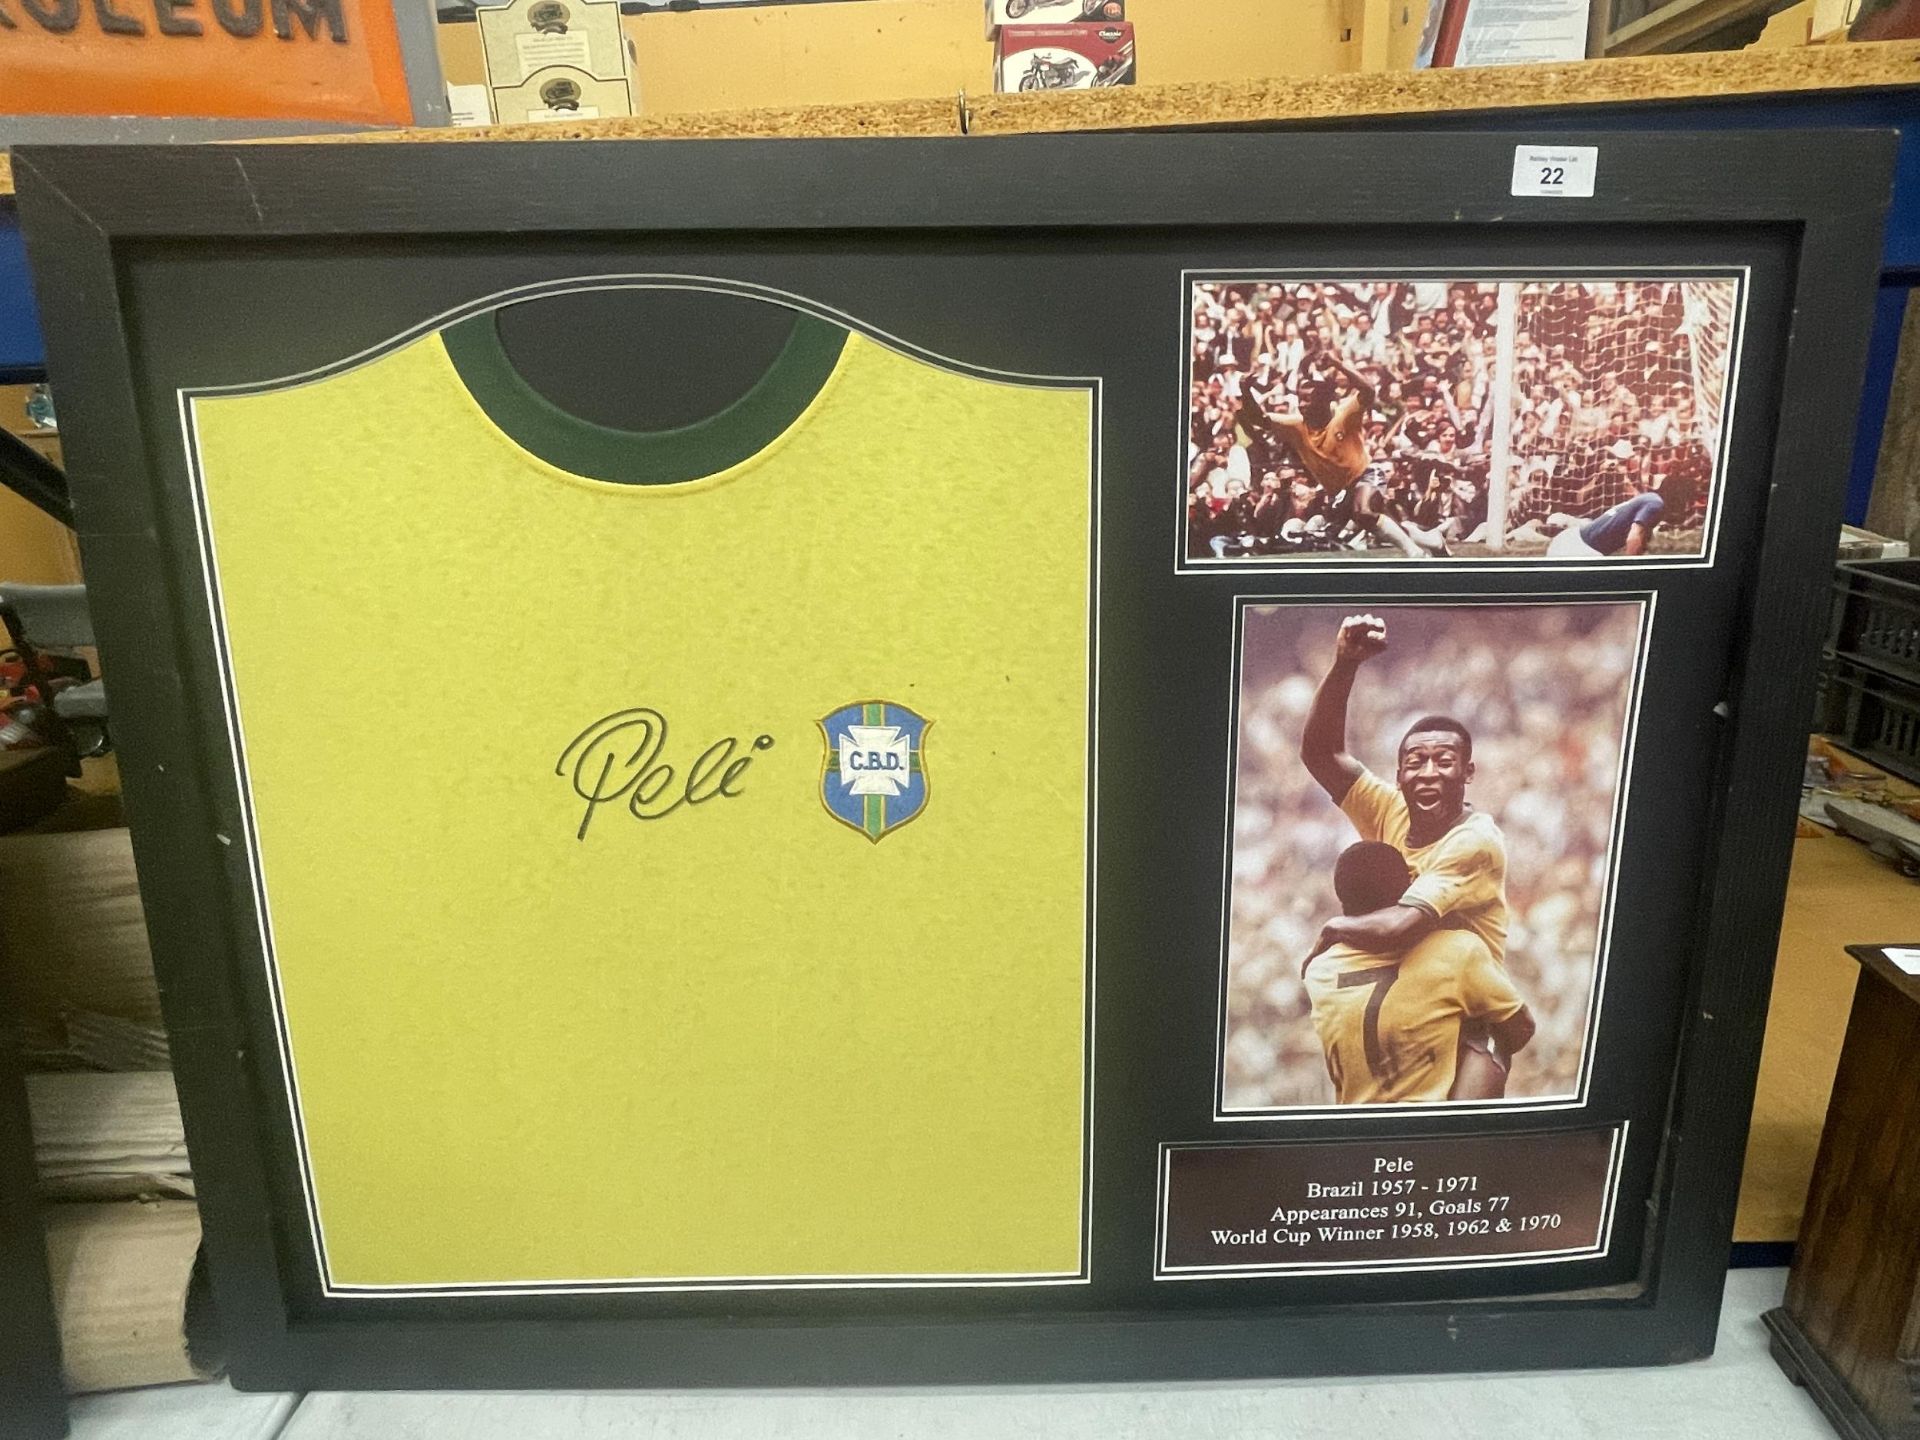 A FRAMED PELE FOOTBALL MONTAGE WITH SIGNED SHIRT, WITH ALL STAR SIGNINGS CERTIFICATE OF AUTHENTICITY